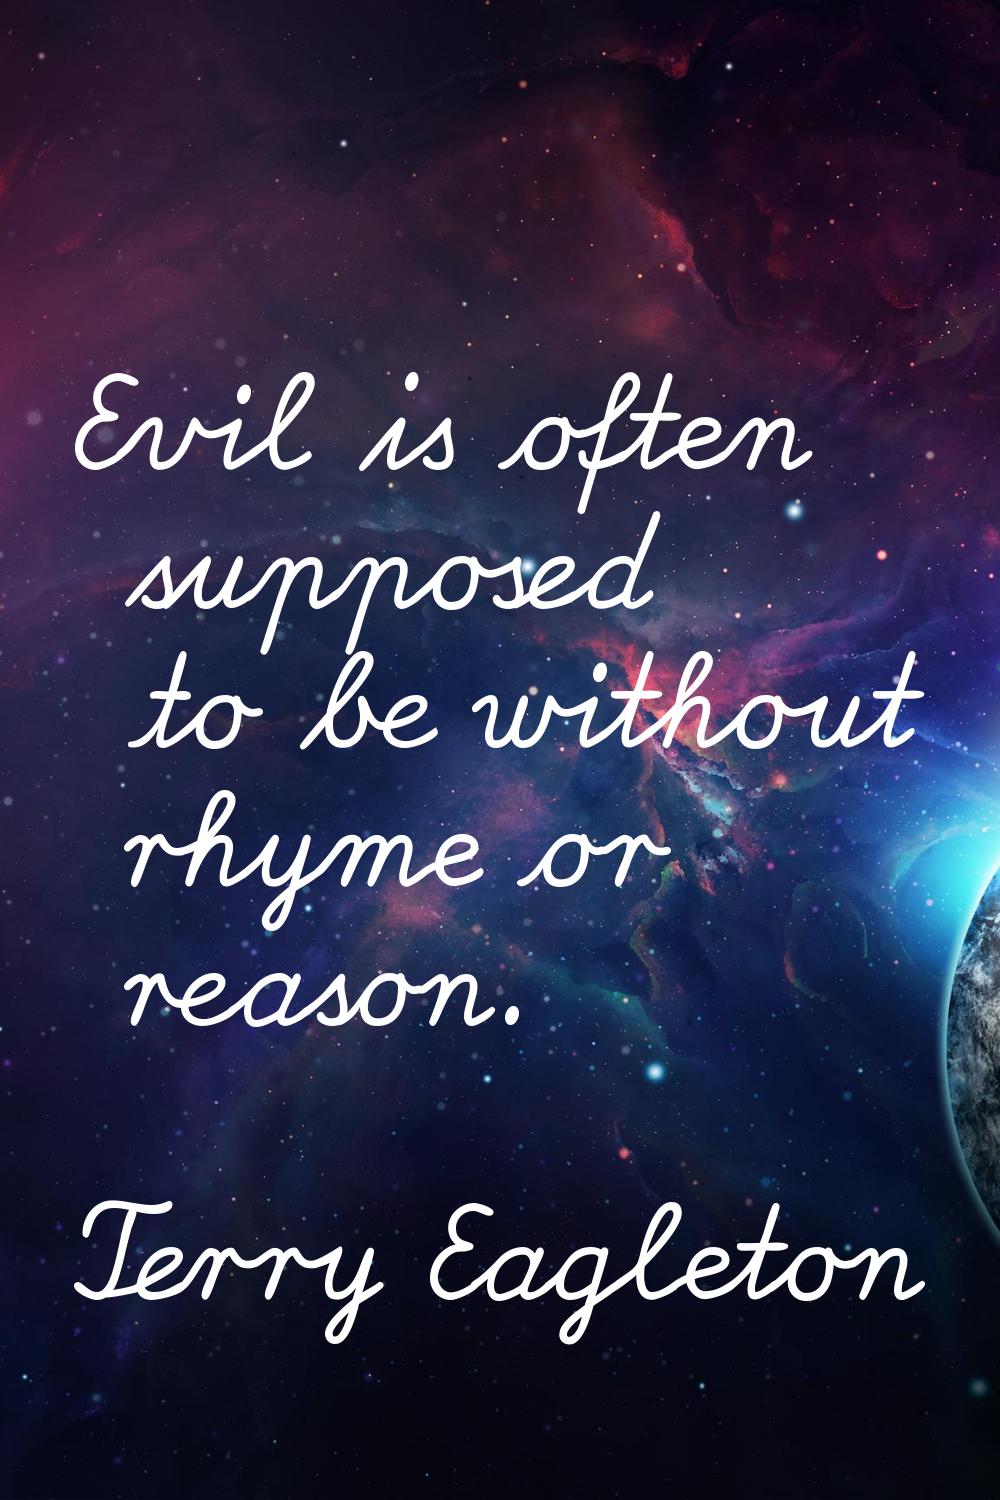 Evil is often supposed to be without rhyme or reason.